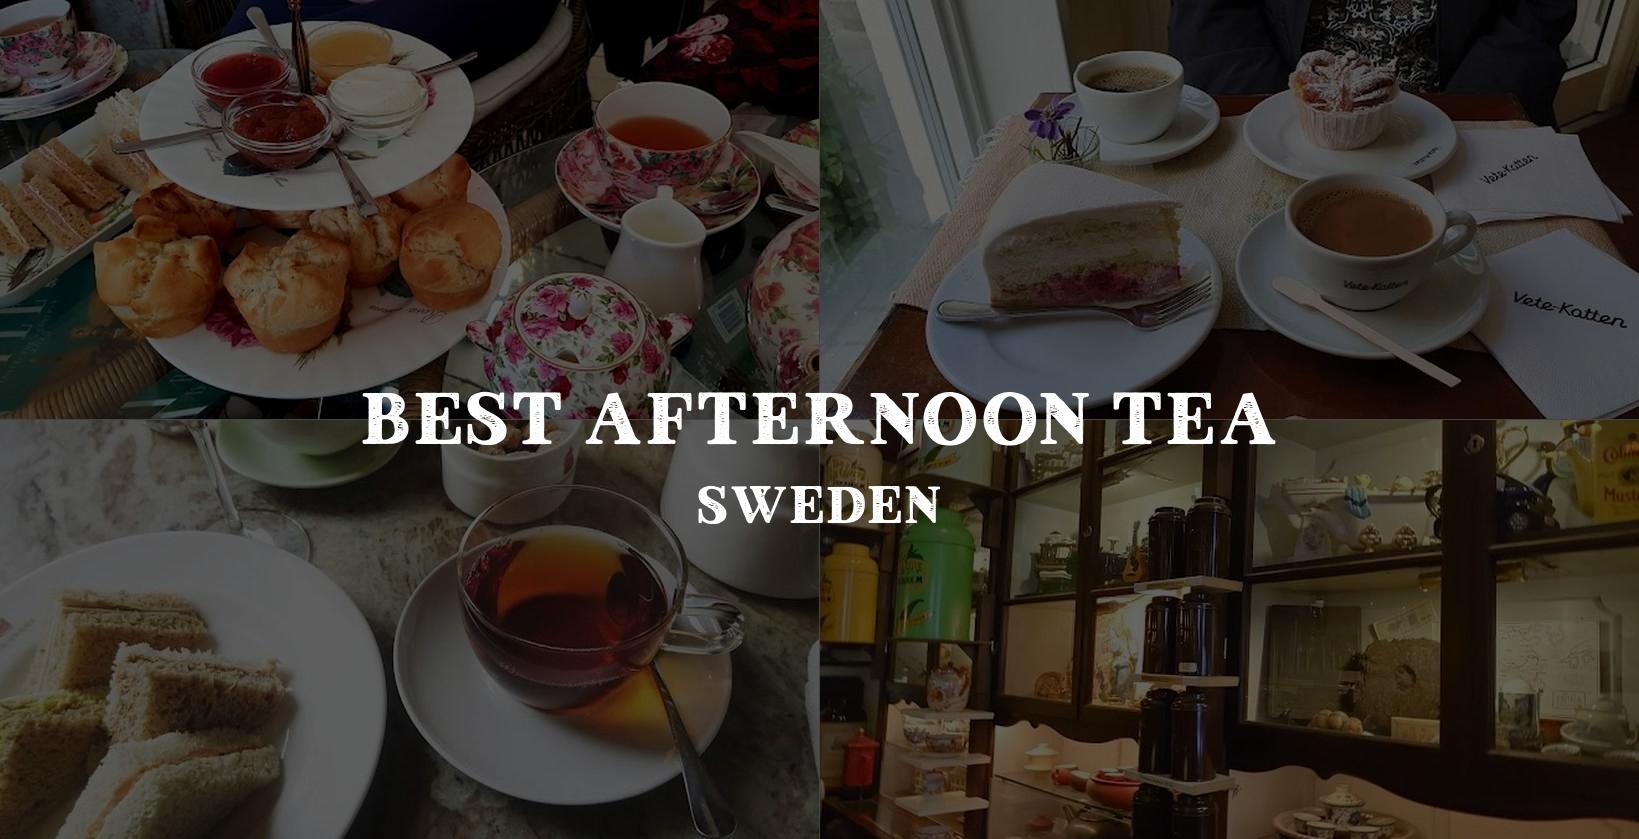 Choosing the perfect spot for afternoon tea in Sweden